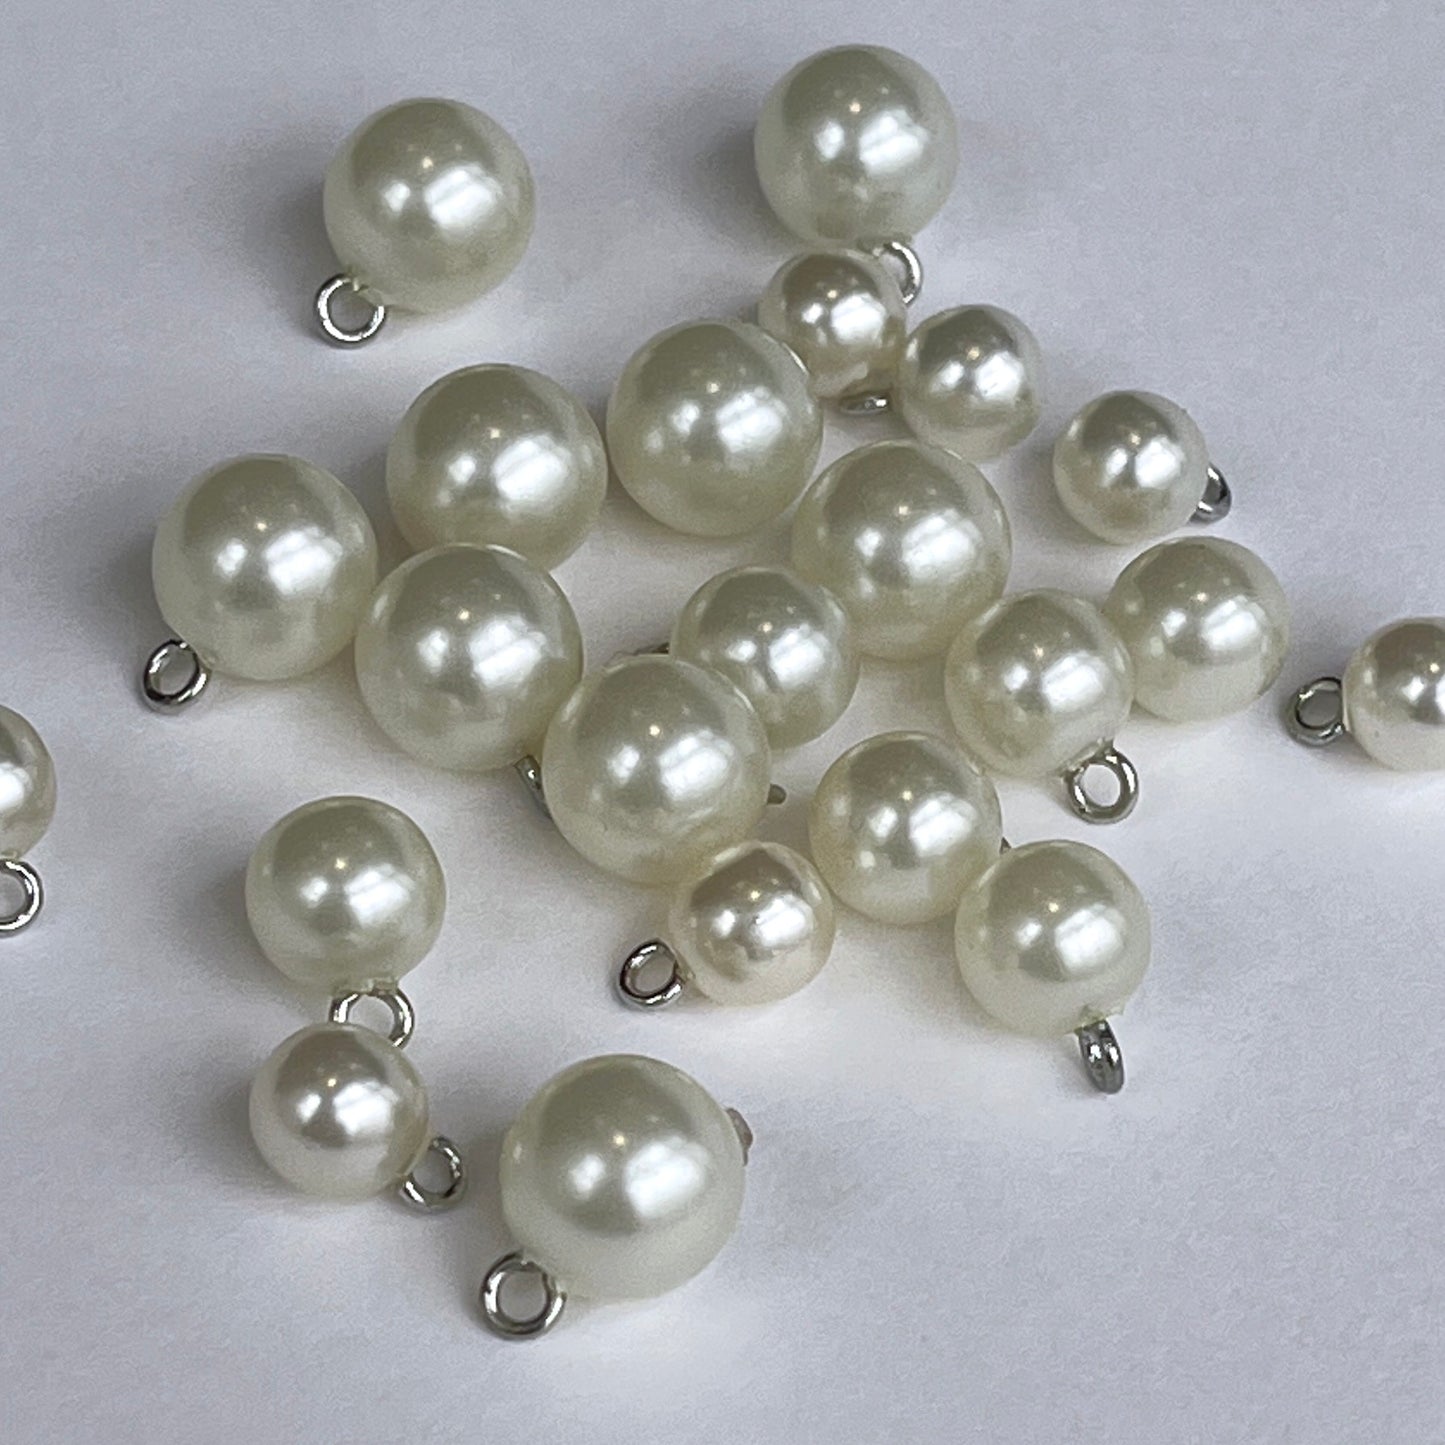 Pearl bridal ball buttons with metal shank perfect for bridal wear, baptism and Christening gowns or even a fancy cardi! Available in either white or ivory and 3 sizes.